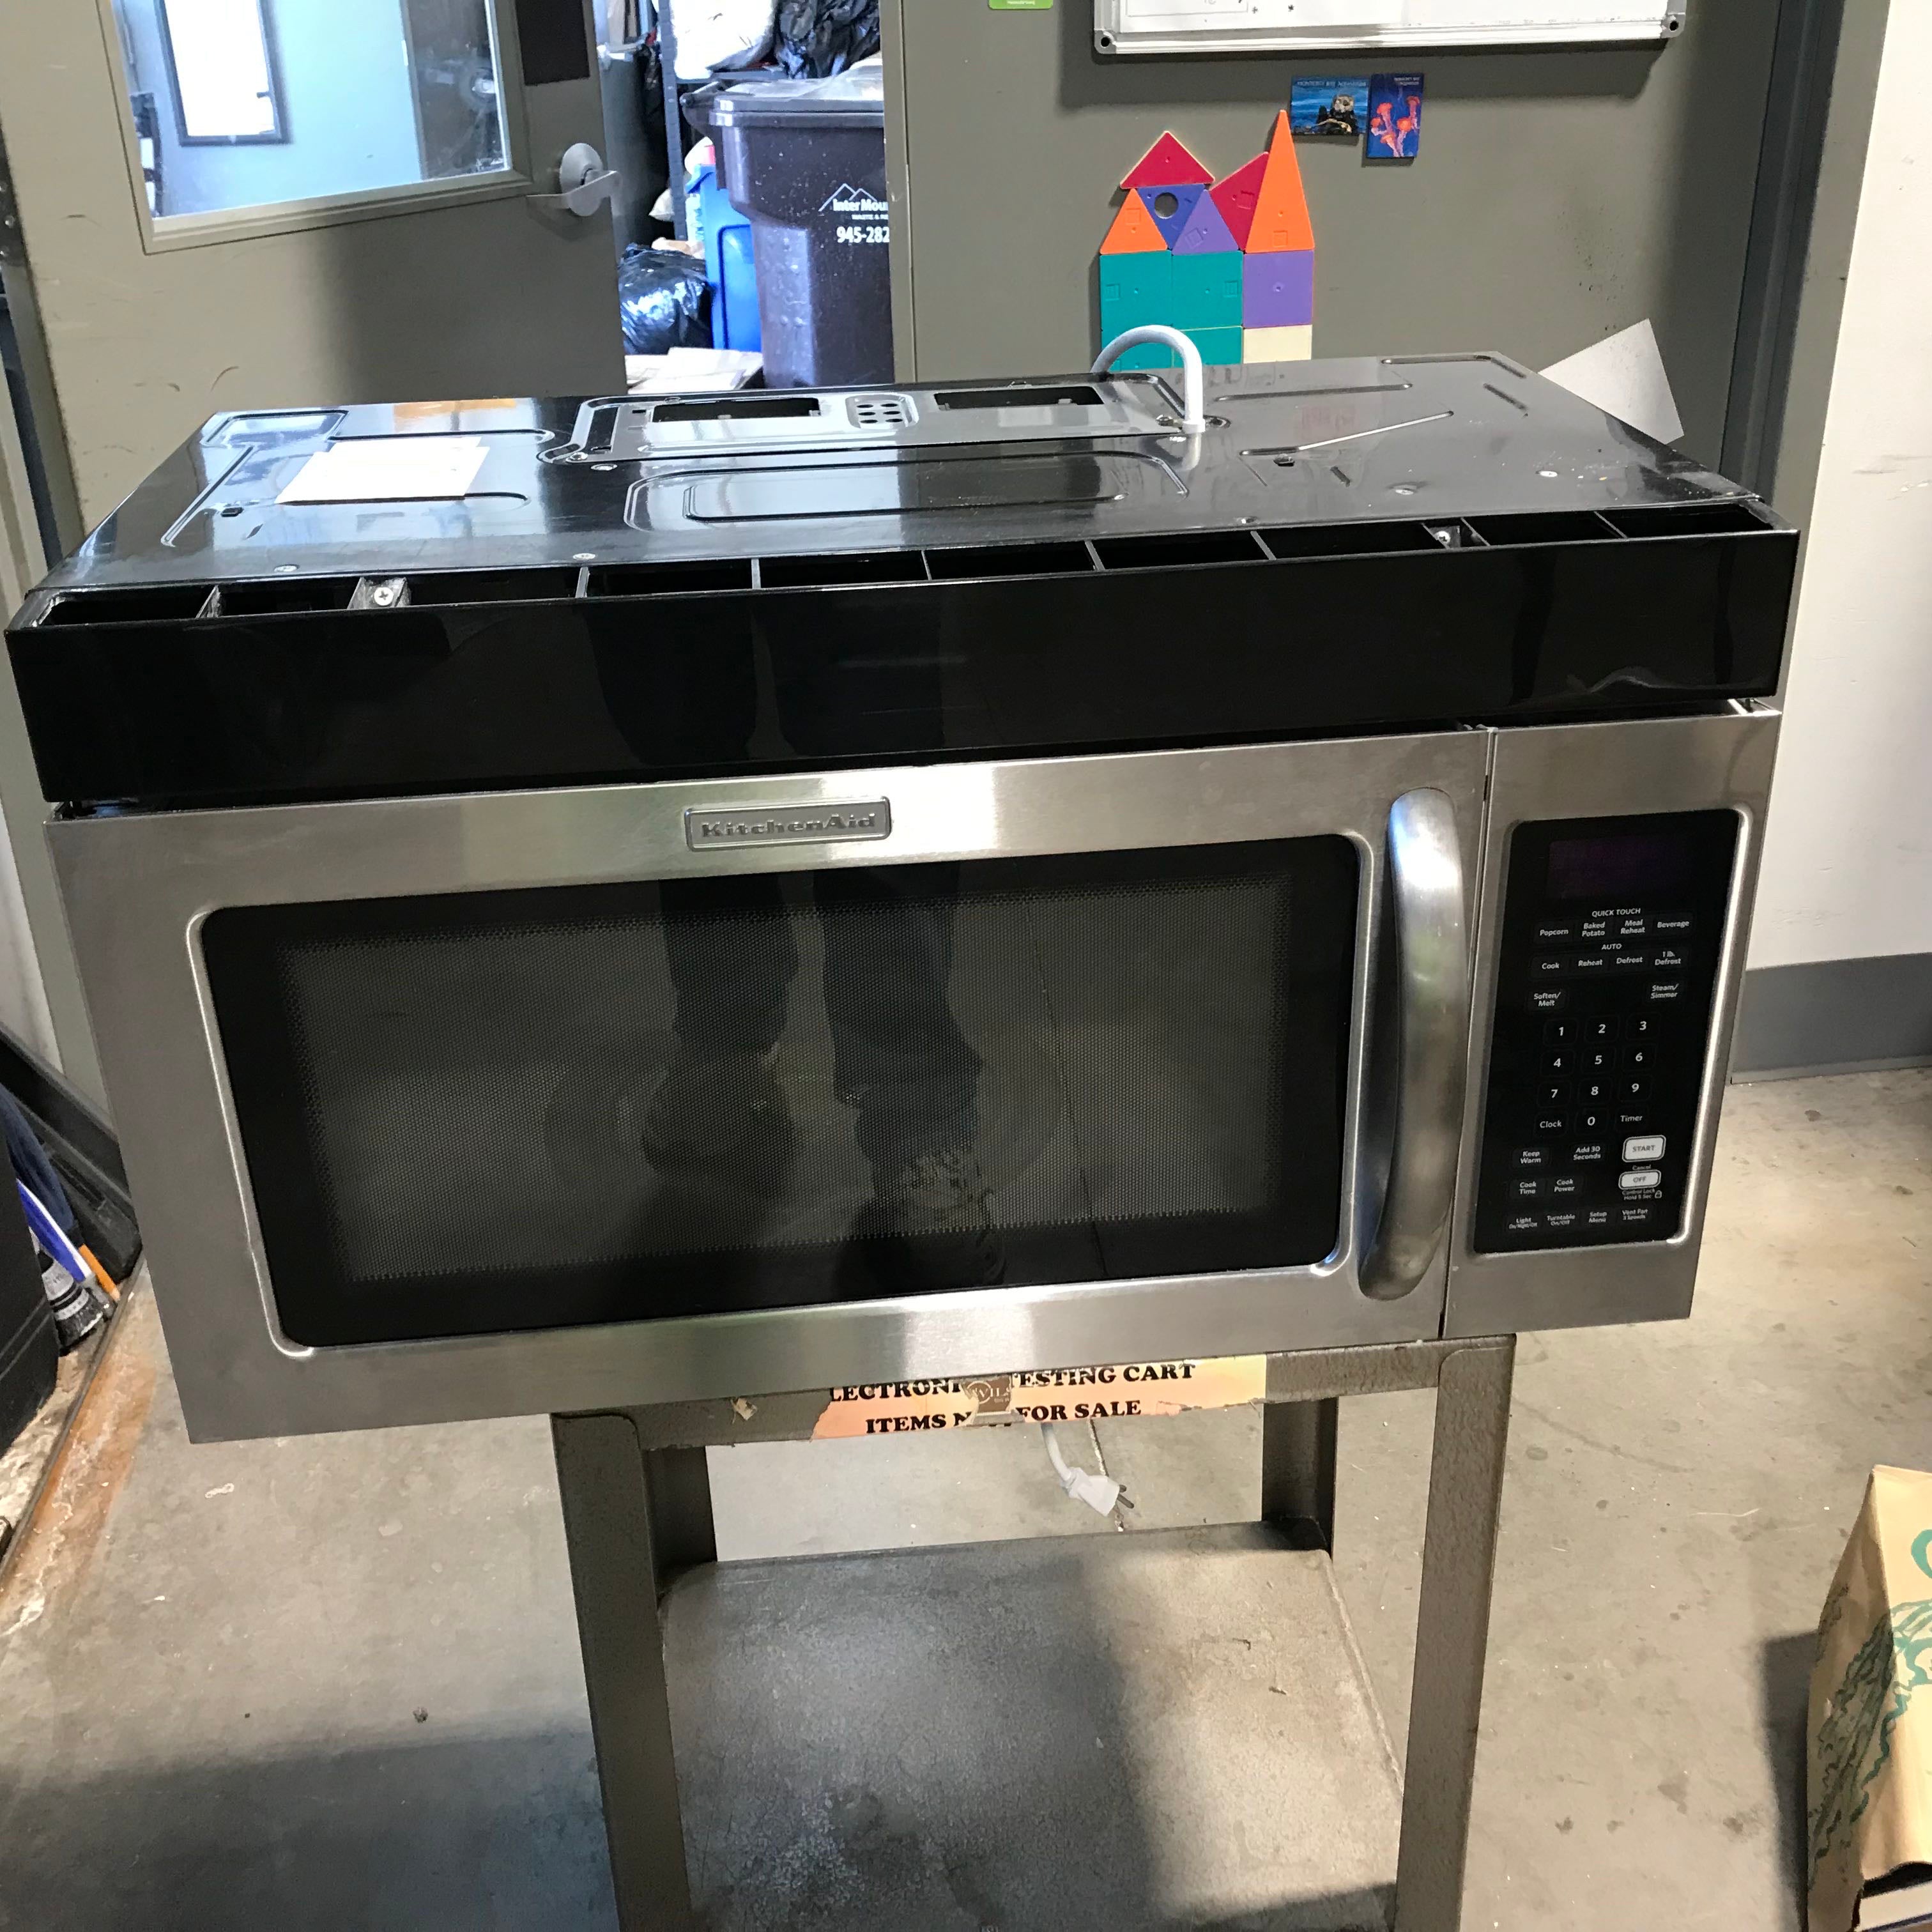 KitchenAid Stainless Steel Over The Range Microwave